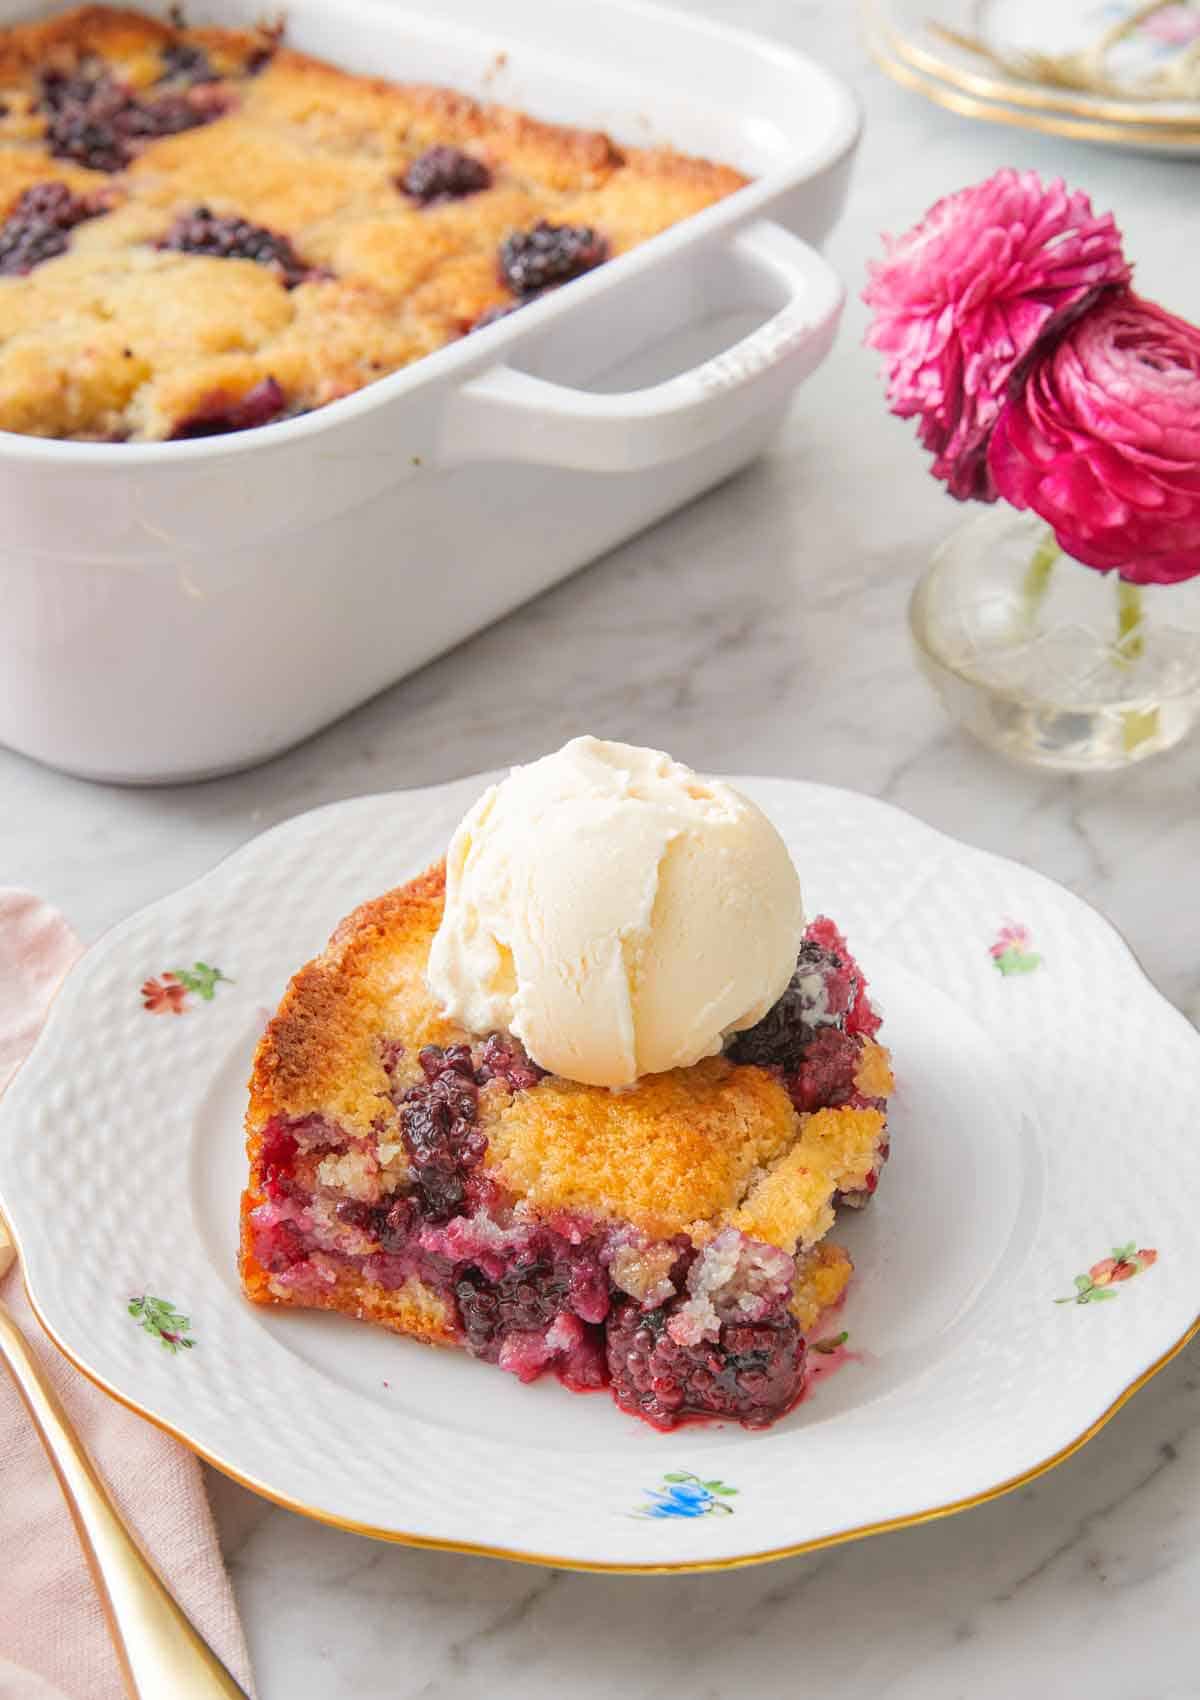 A plate with a serving of blackberry cobbler with a scoop of ice cream on top.